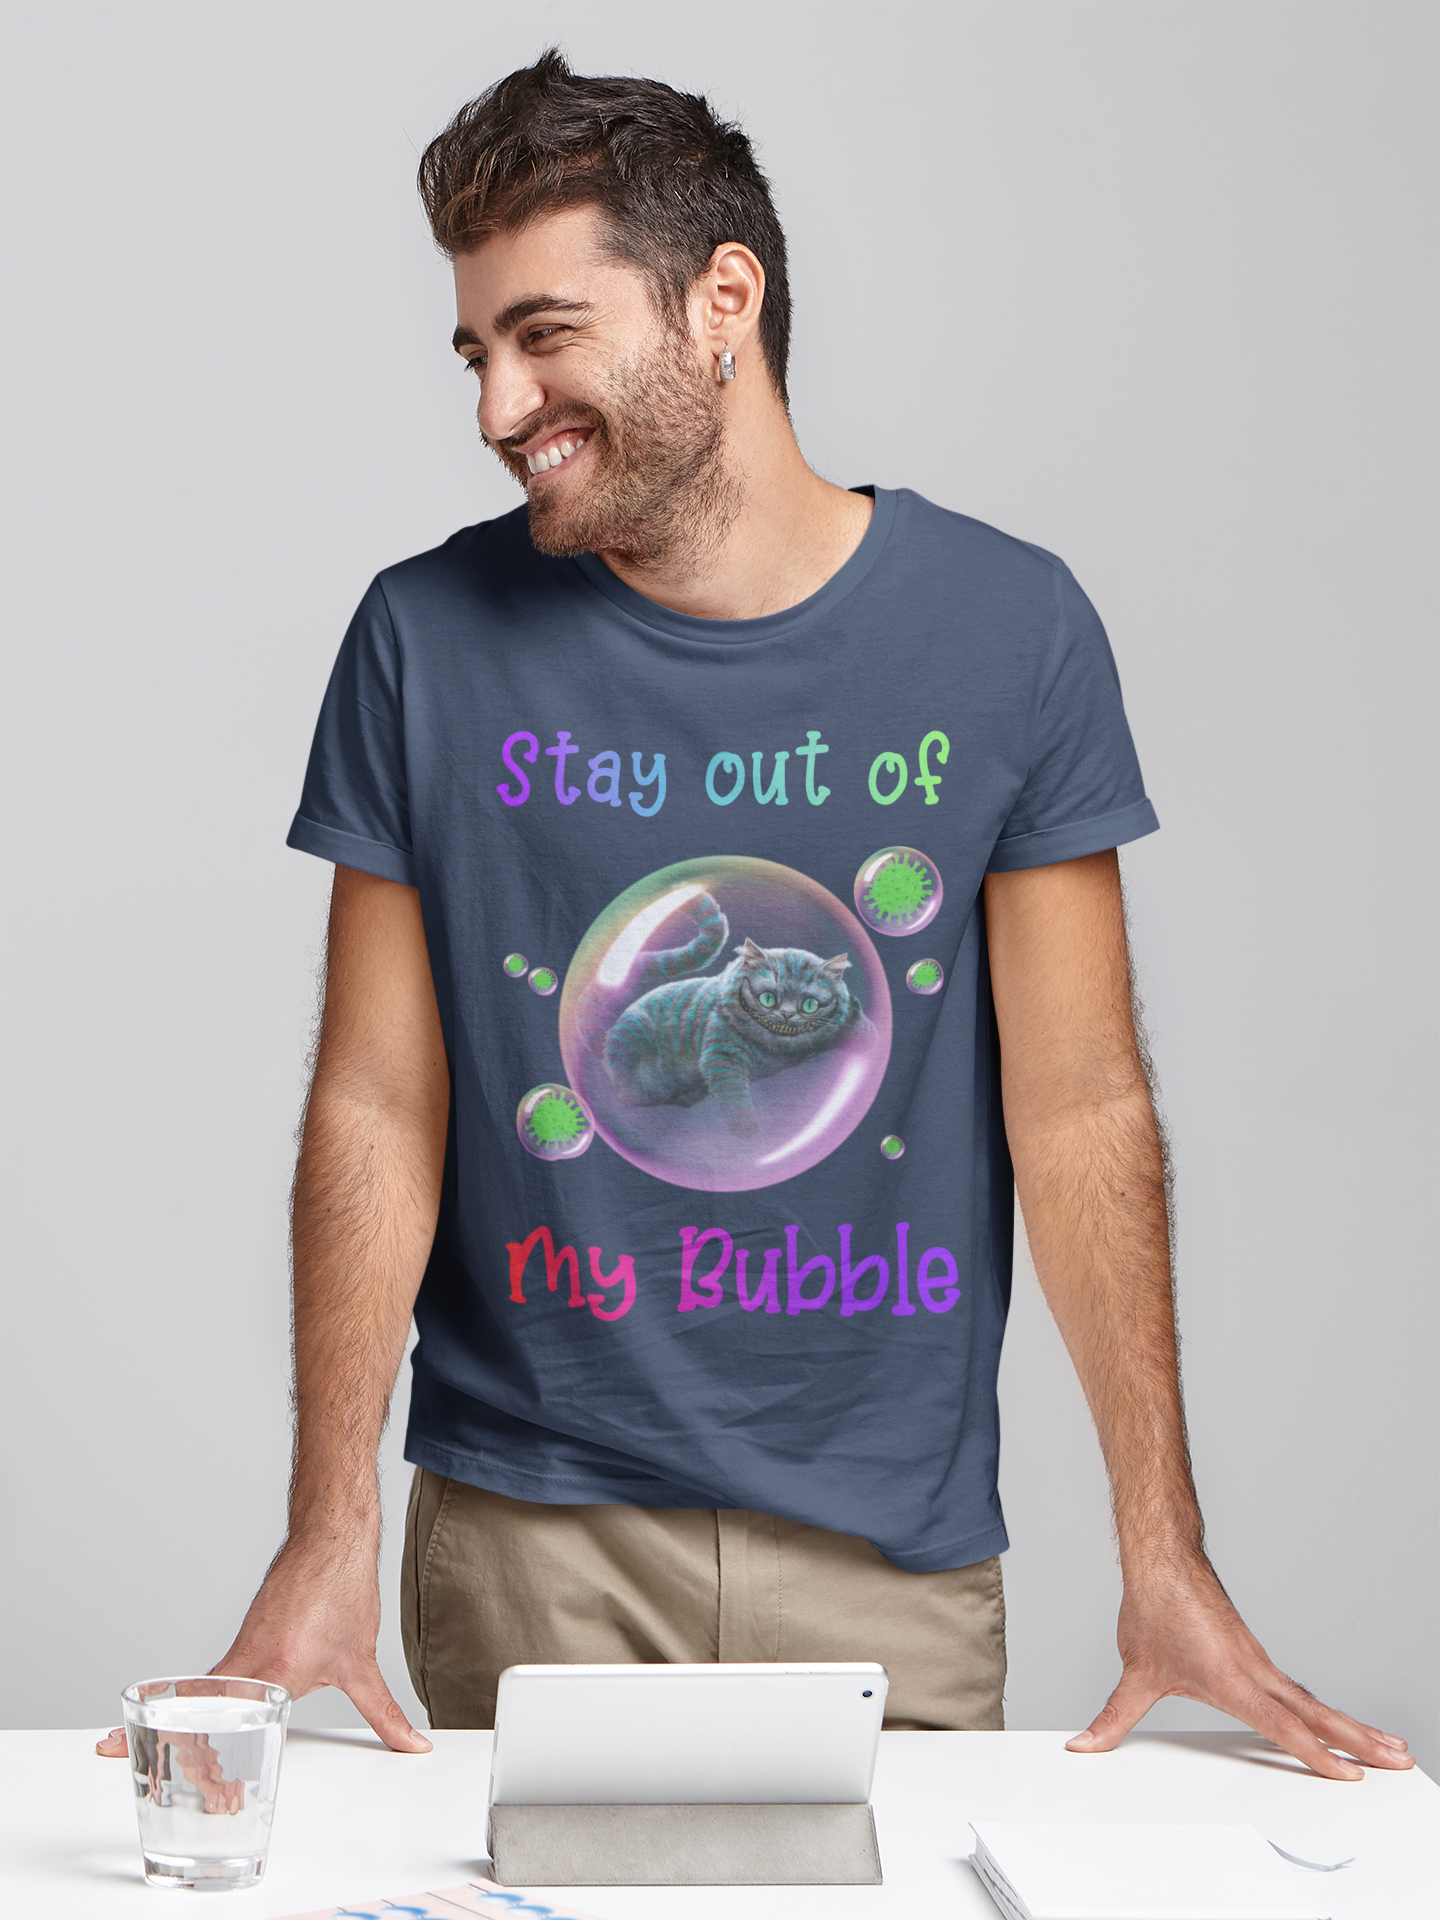 Disney Alice In Wonderland T Shirt, Cheshire Cat T Shirt, Stay Out Of My Bubble Shirt